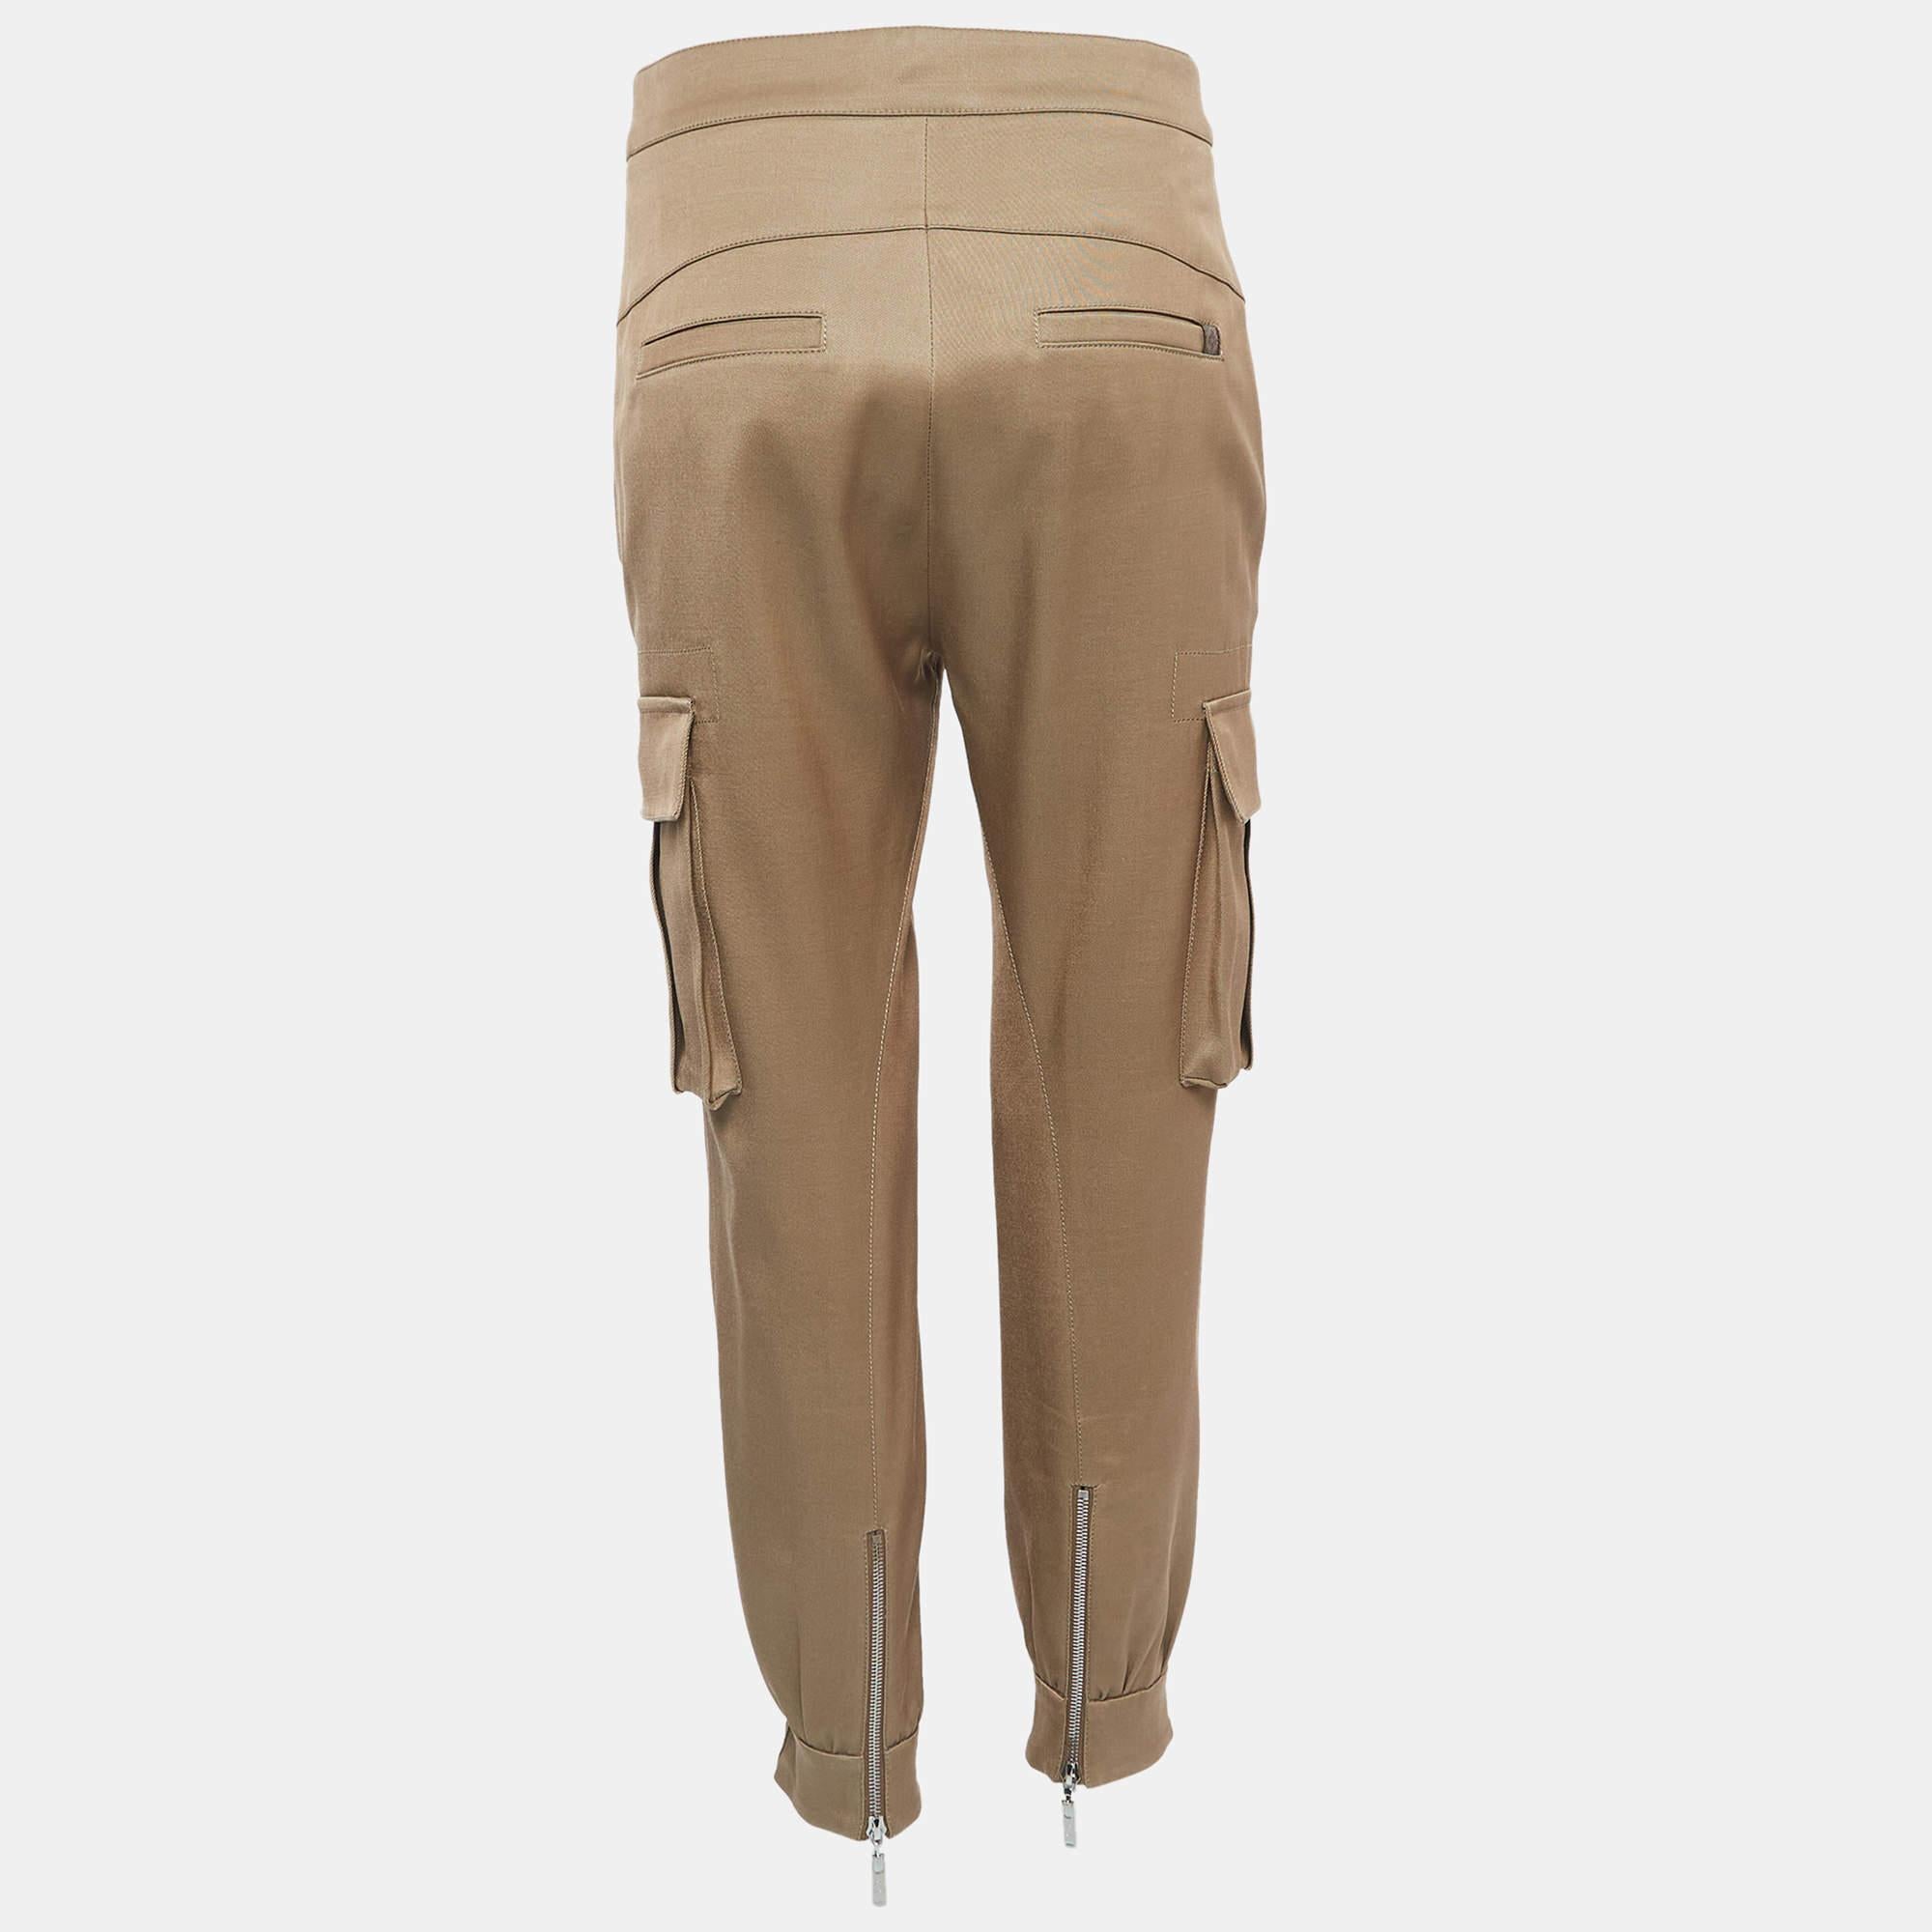 Style these pants with your favorite blouses or shirts and create effortlessly chic looks. They are stitched using quality fabrics and showcase a superb fit. These Louis Vuitton cargo pants feature a diagonal zipper and band all the way from the